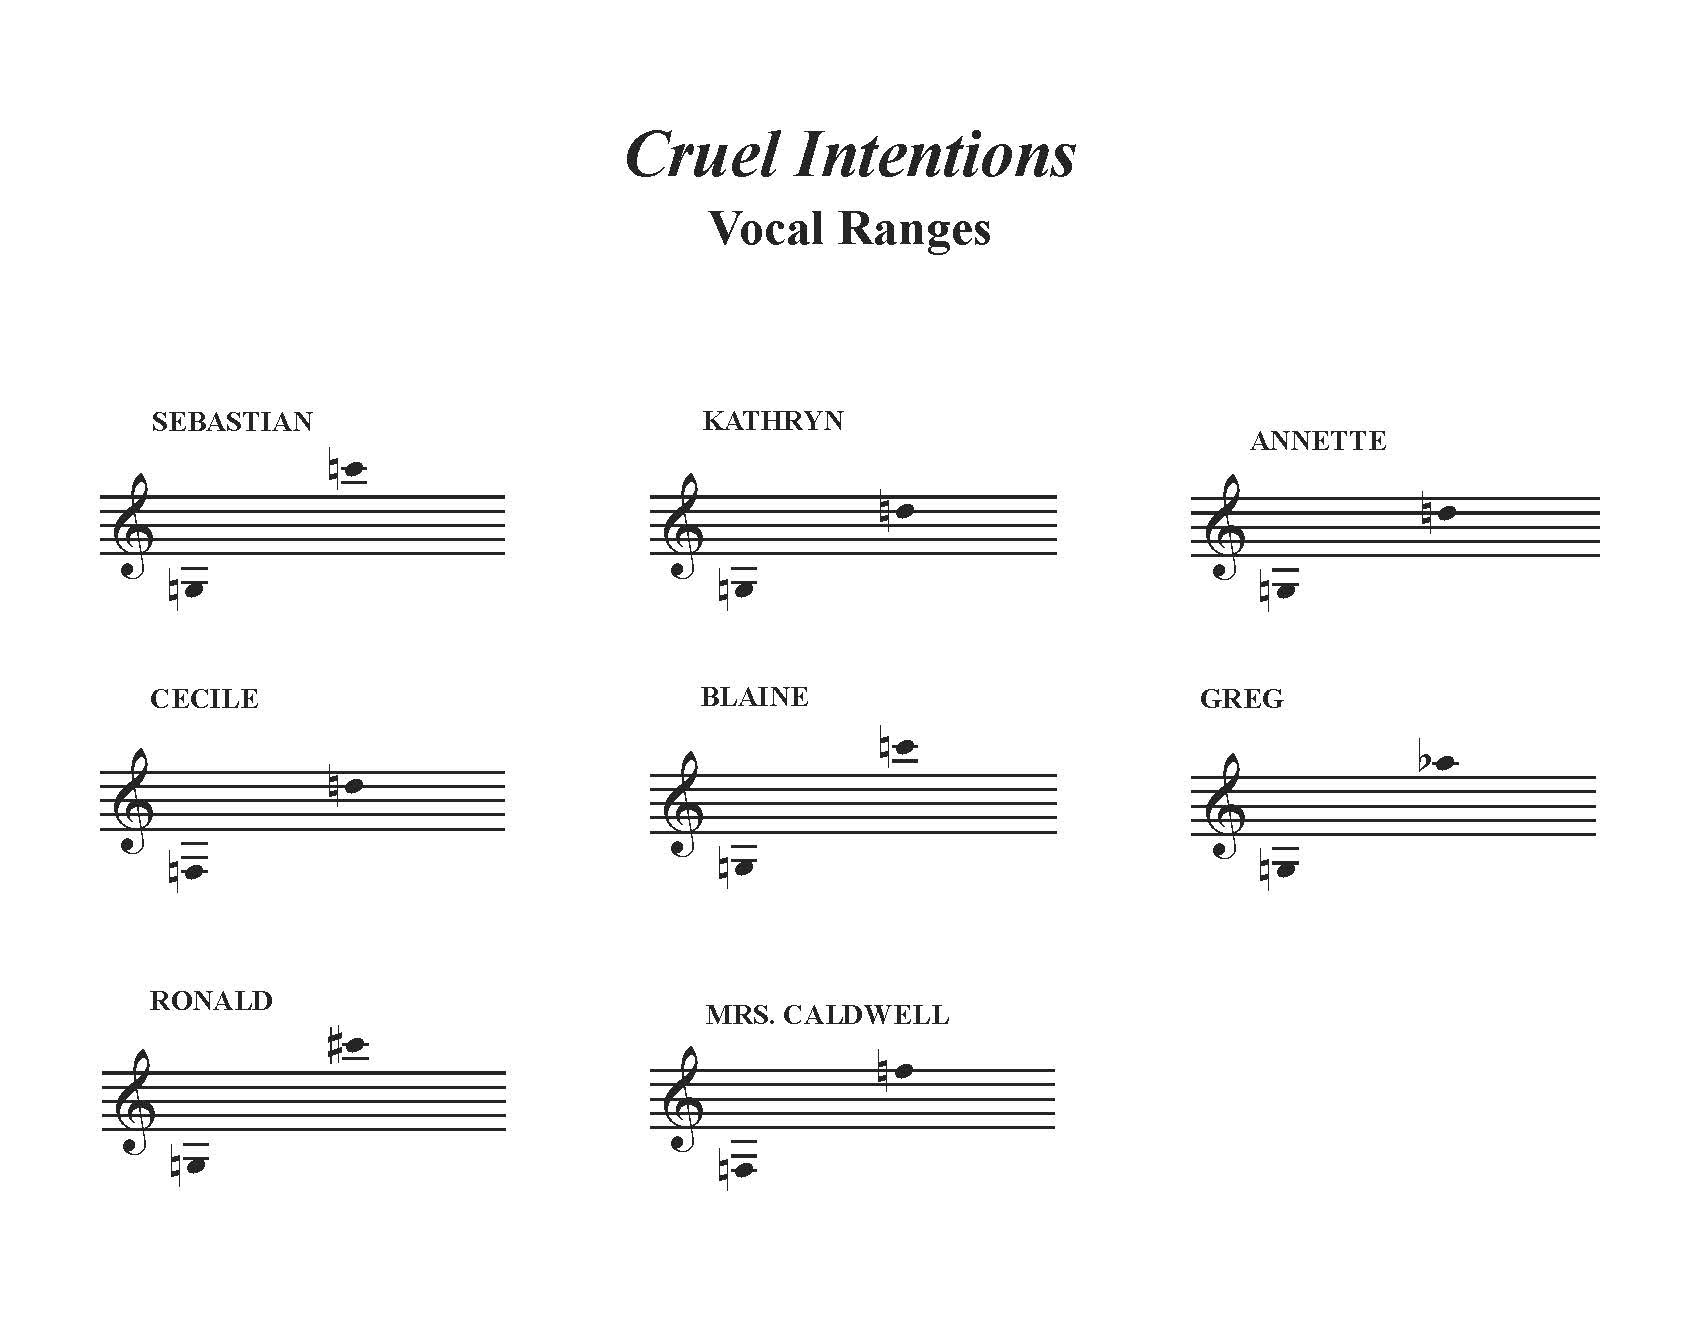 Cruel Intentions: The ’90s Musical Vocal Ranges